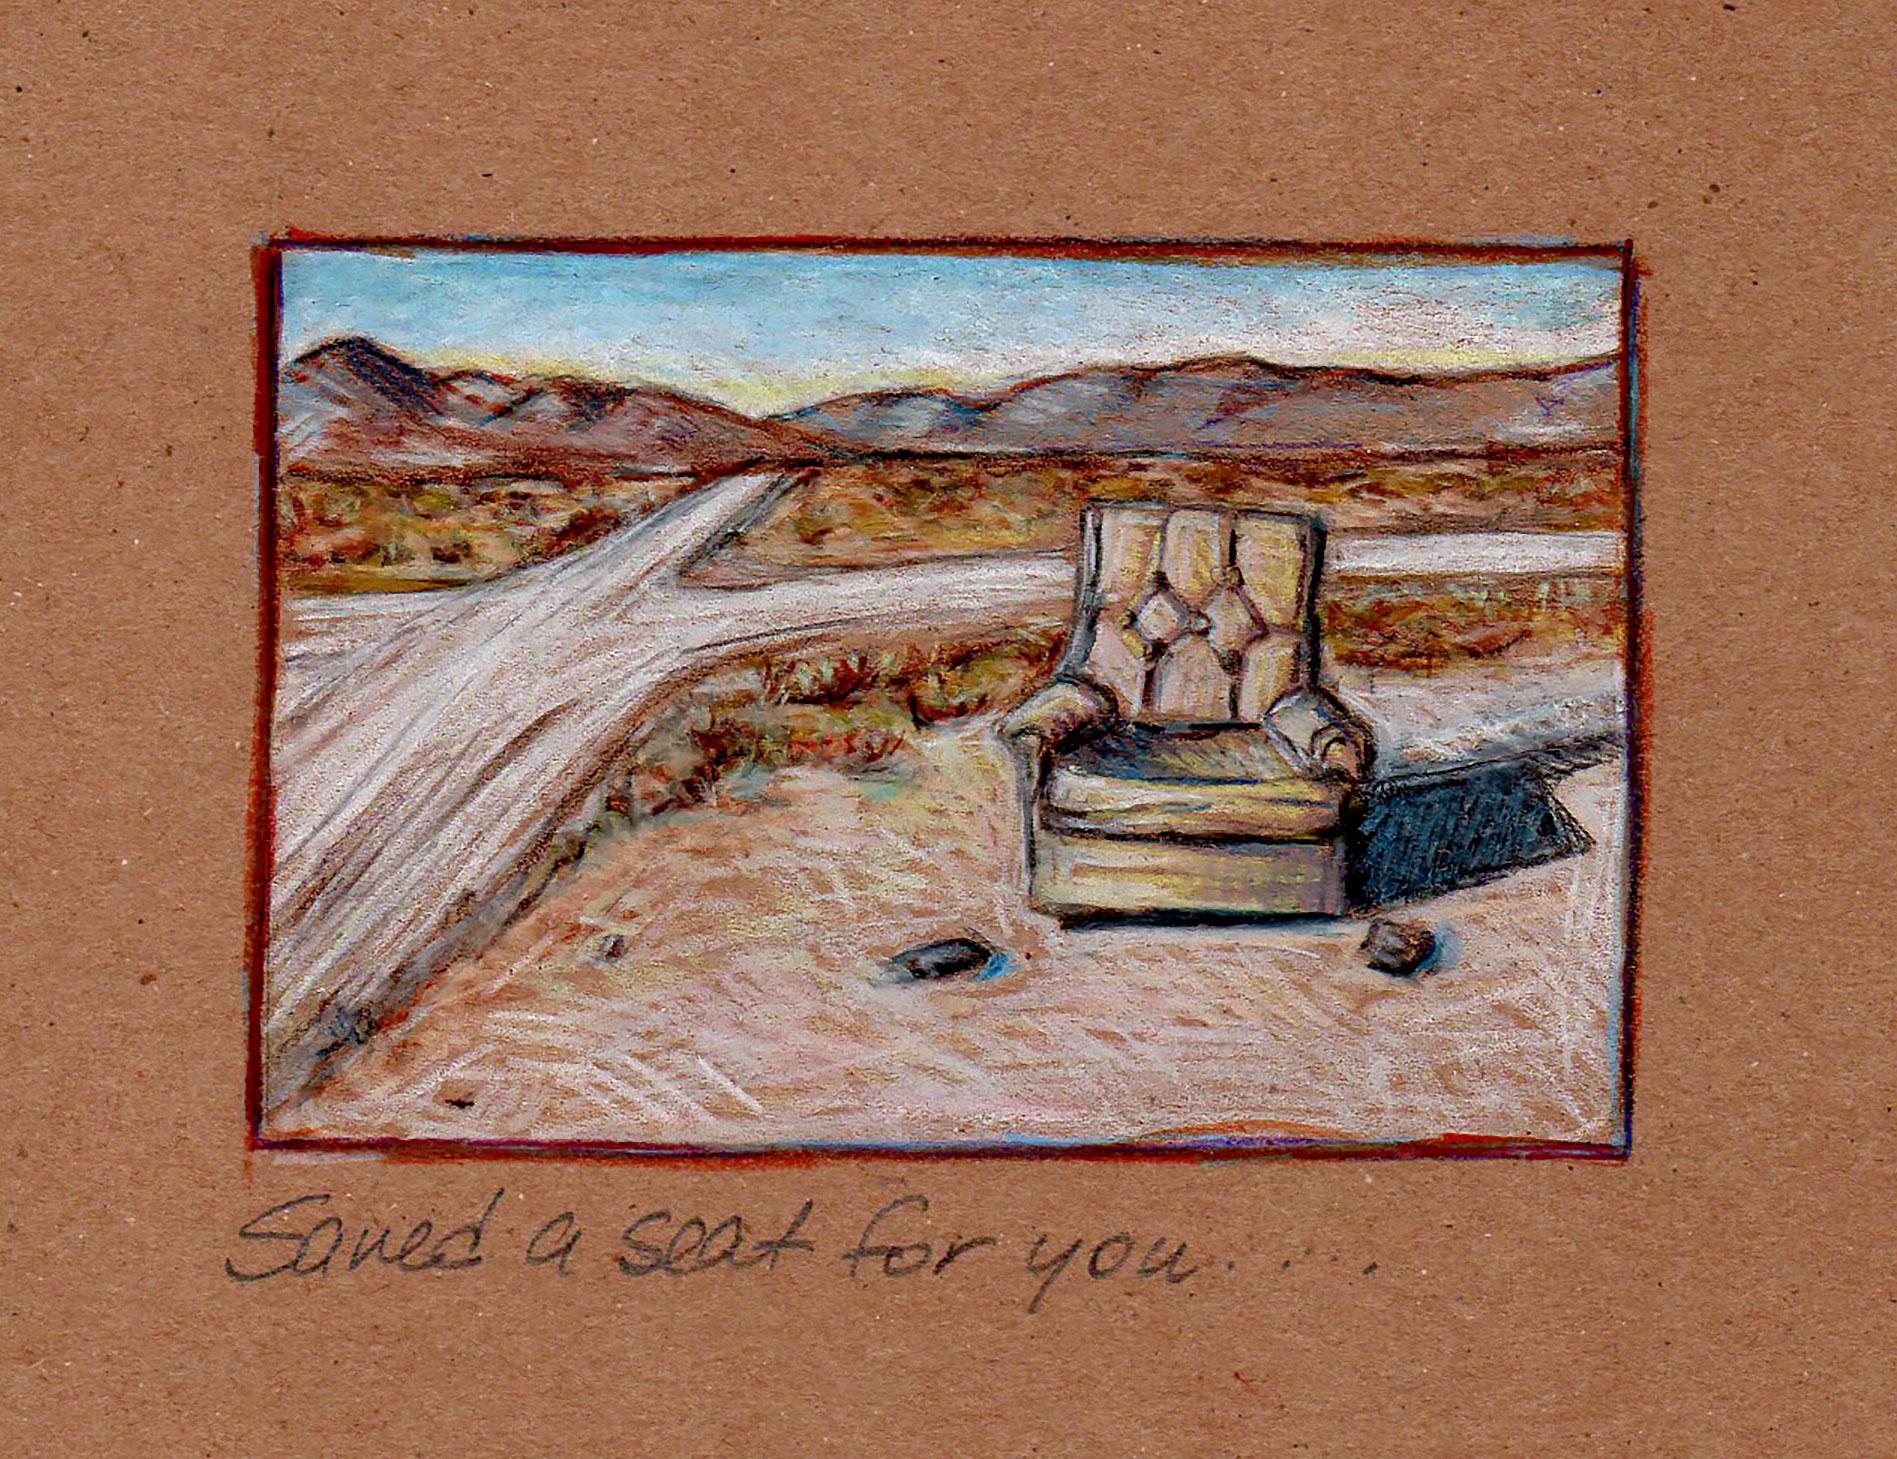 Drawing of abandoned chair in the desert